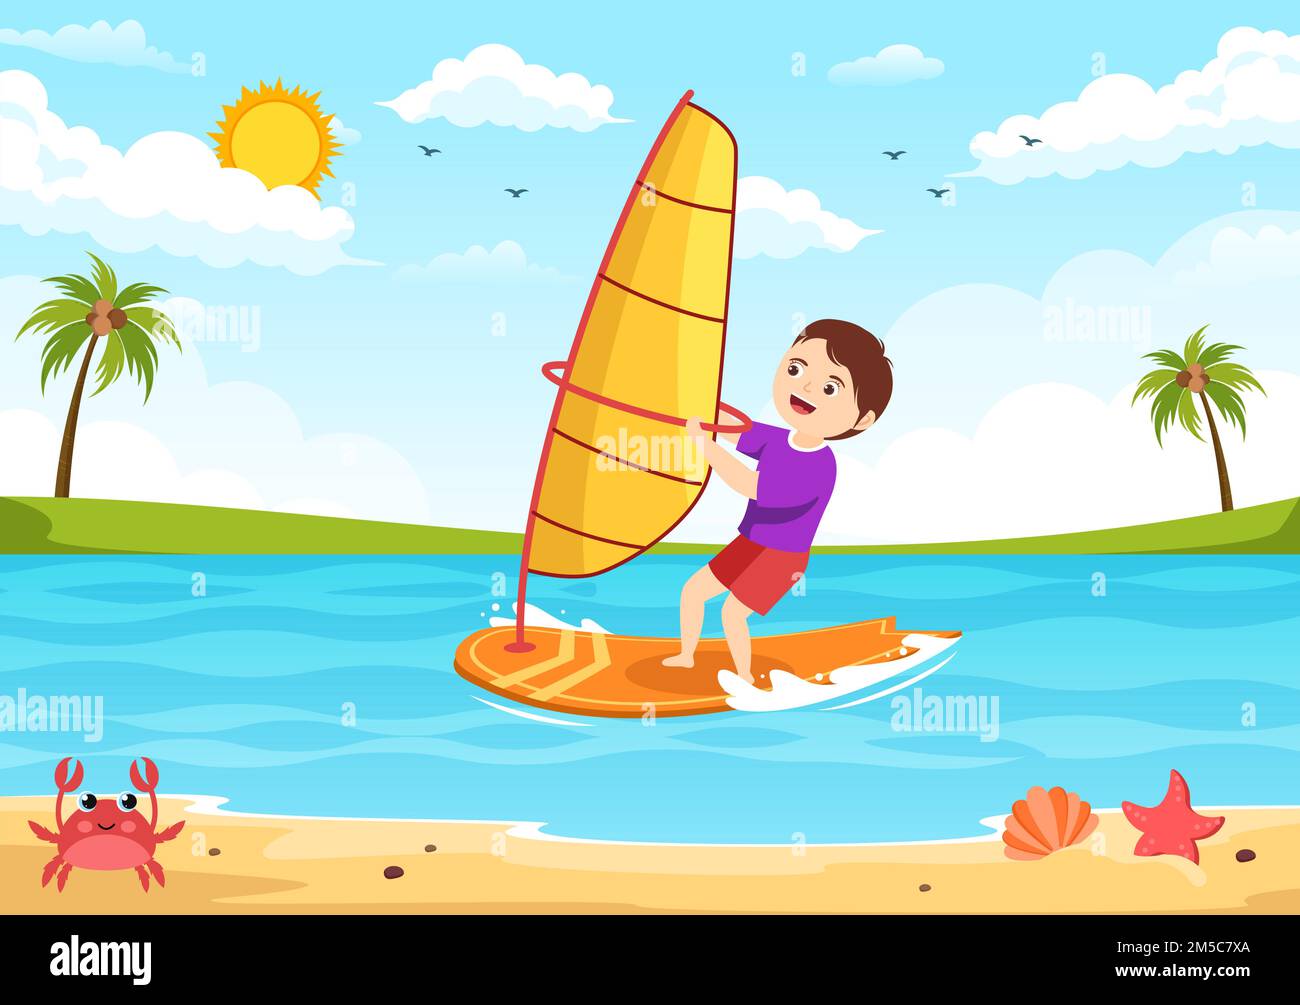 Windsurfing with Kids Standing on the Sailing Boat and Holding the Sail in Extreme Water Sport Flat Cartoon Hand Drawn Templates Illustration Stock Vector